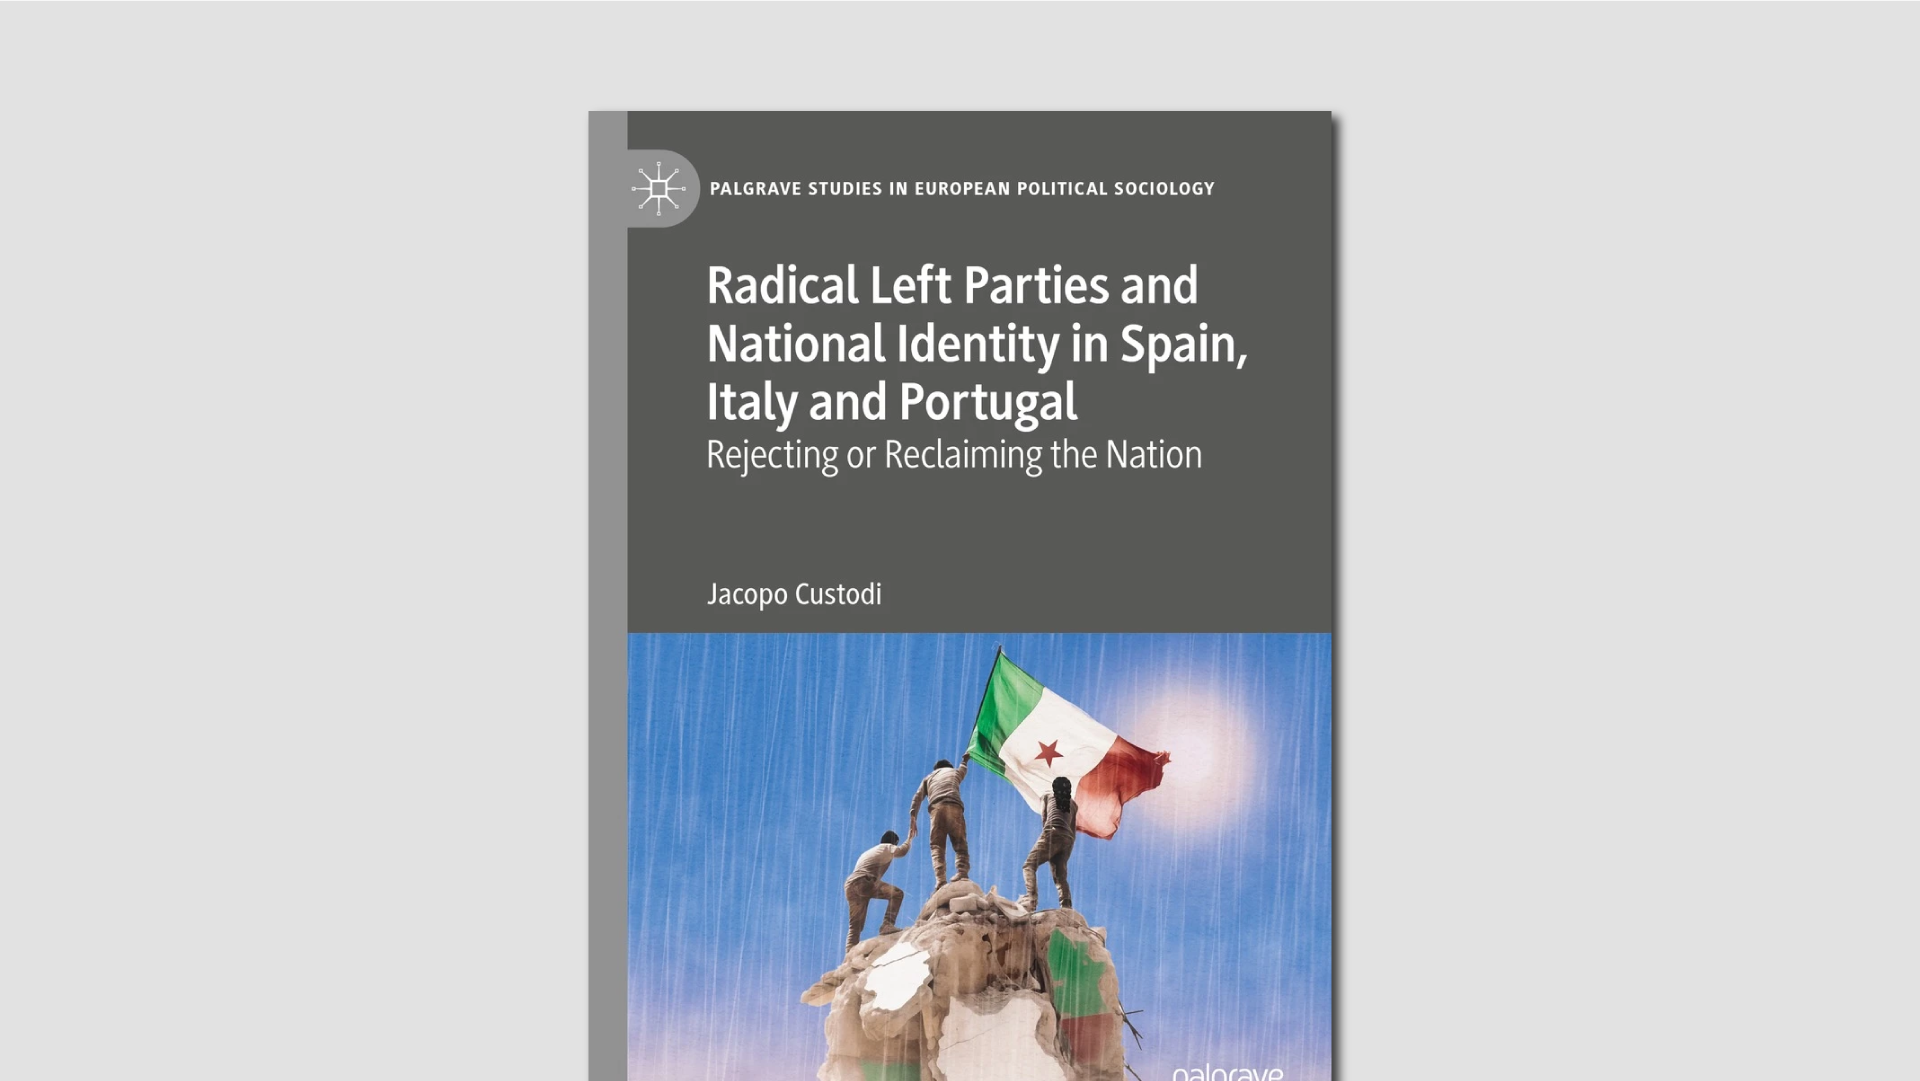 Radical left parties and national identity in Spain, Italy and Portugal